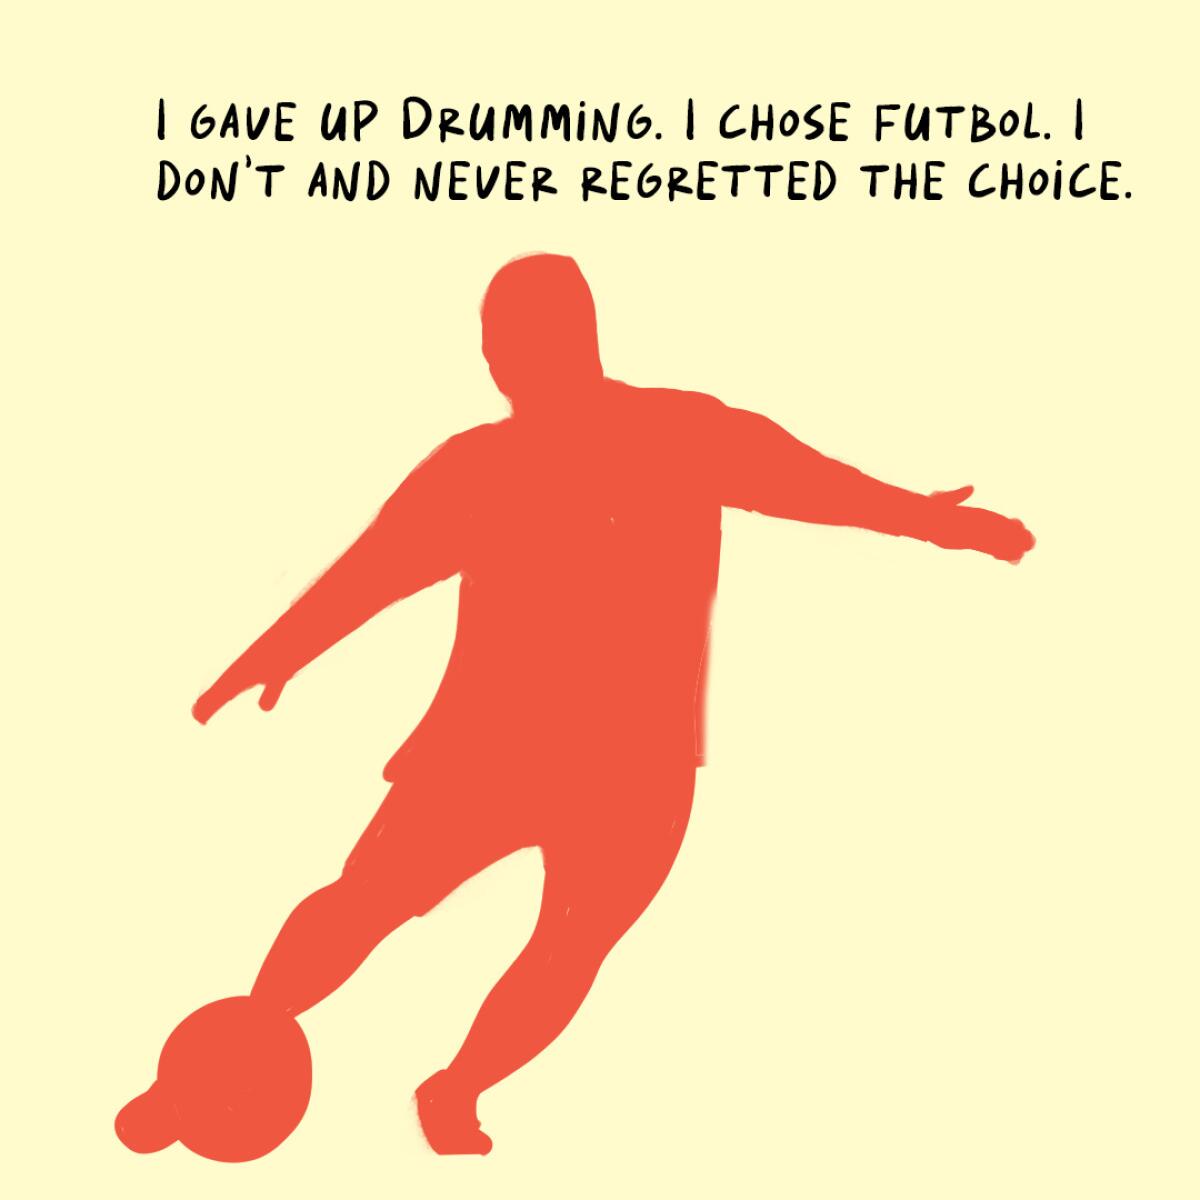 I gave up drumming. I chose futbol I don't and never regretted the choice. 